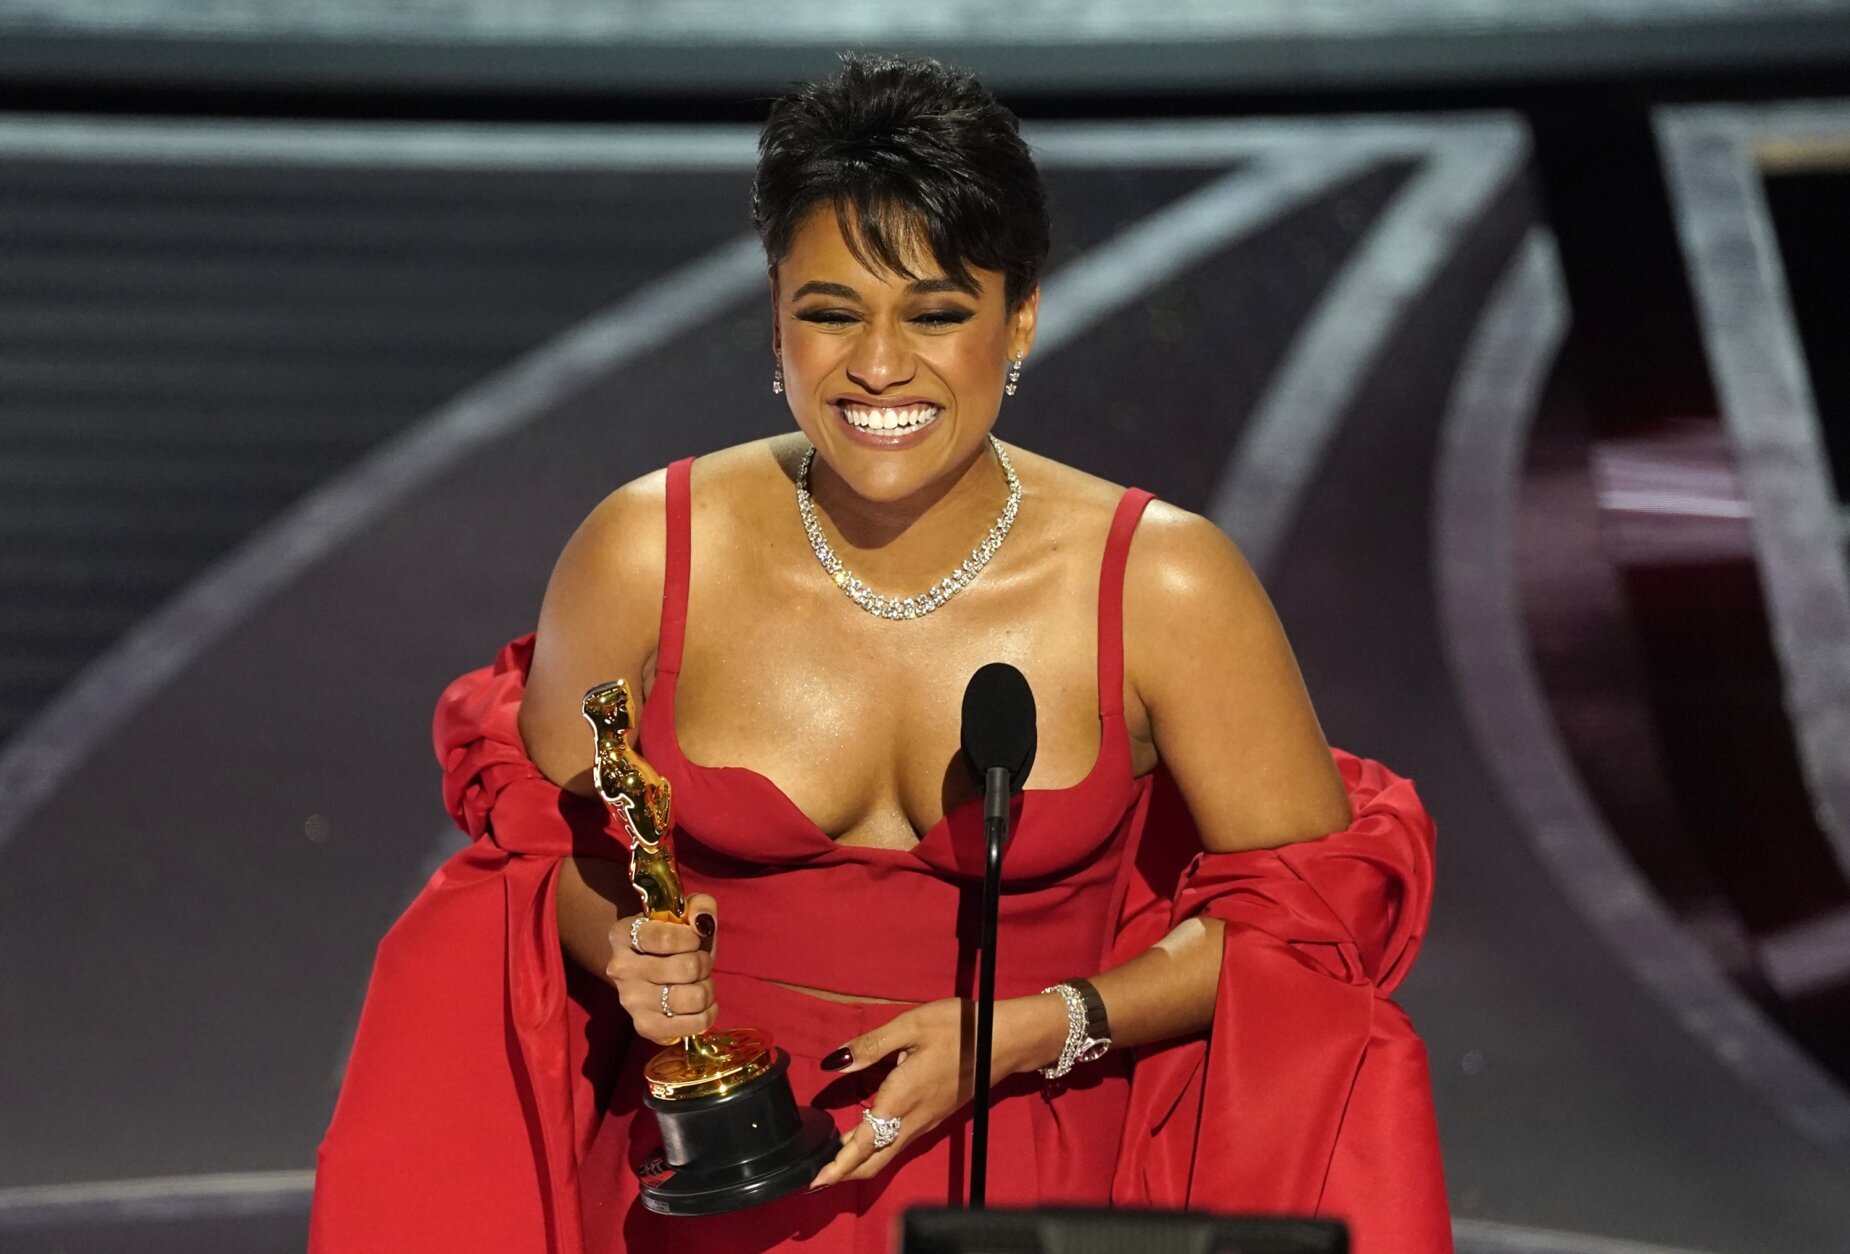 Ariana DeBose accepts the award for best performance by an actress in a supporting role for "West Side Story" at the Oscars on Sunday, March 27, 2022, at the Dolby Theatre in Los Angeles. (AP Photo/Chris Pizzello)